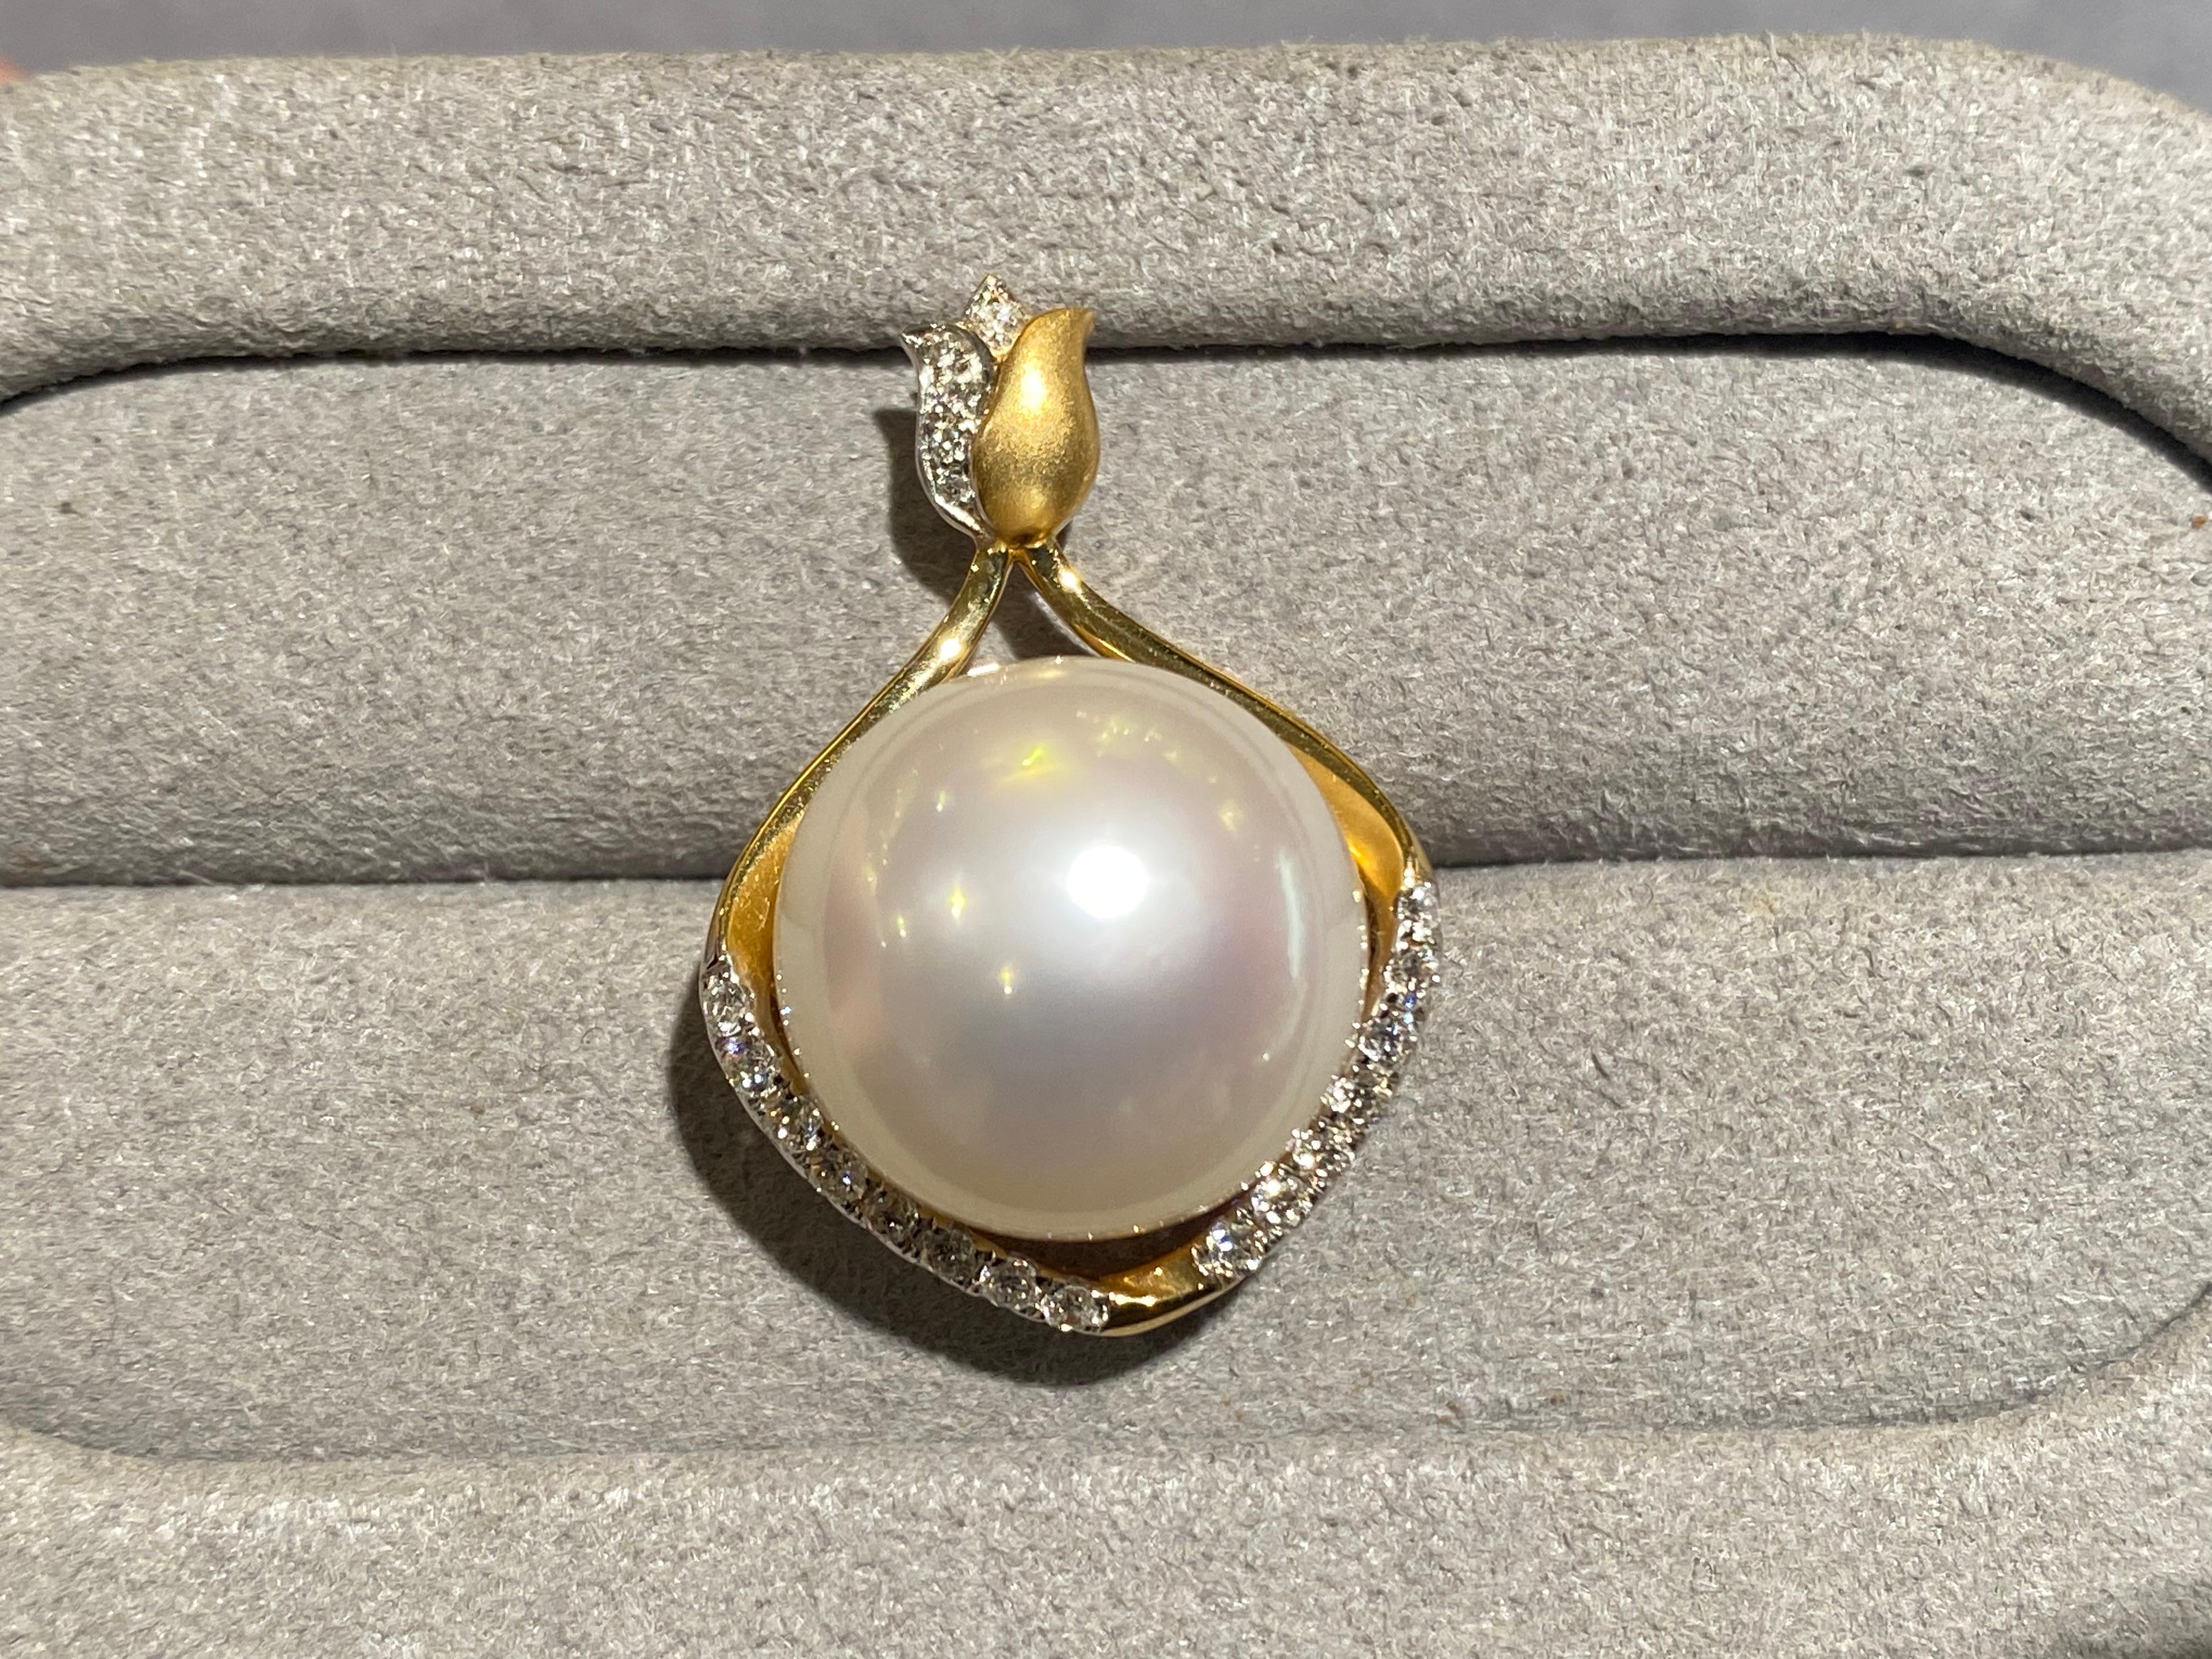 A 13.3 mm White Australian South Sea Pearl and diamond pendant in 18k yellow gold. The pearl is set in a rain-drop shape motif with diamond pave at the bottom part of the rain-drop. It has a tulip-like bale set with diamonds. The pearl is white in